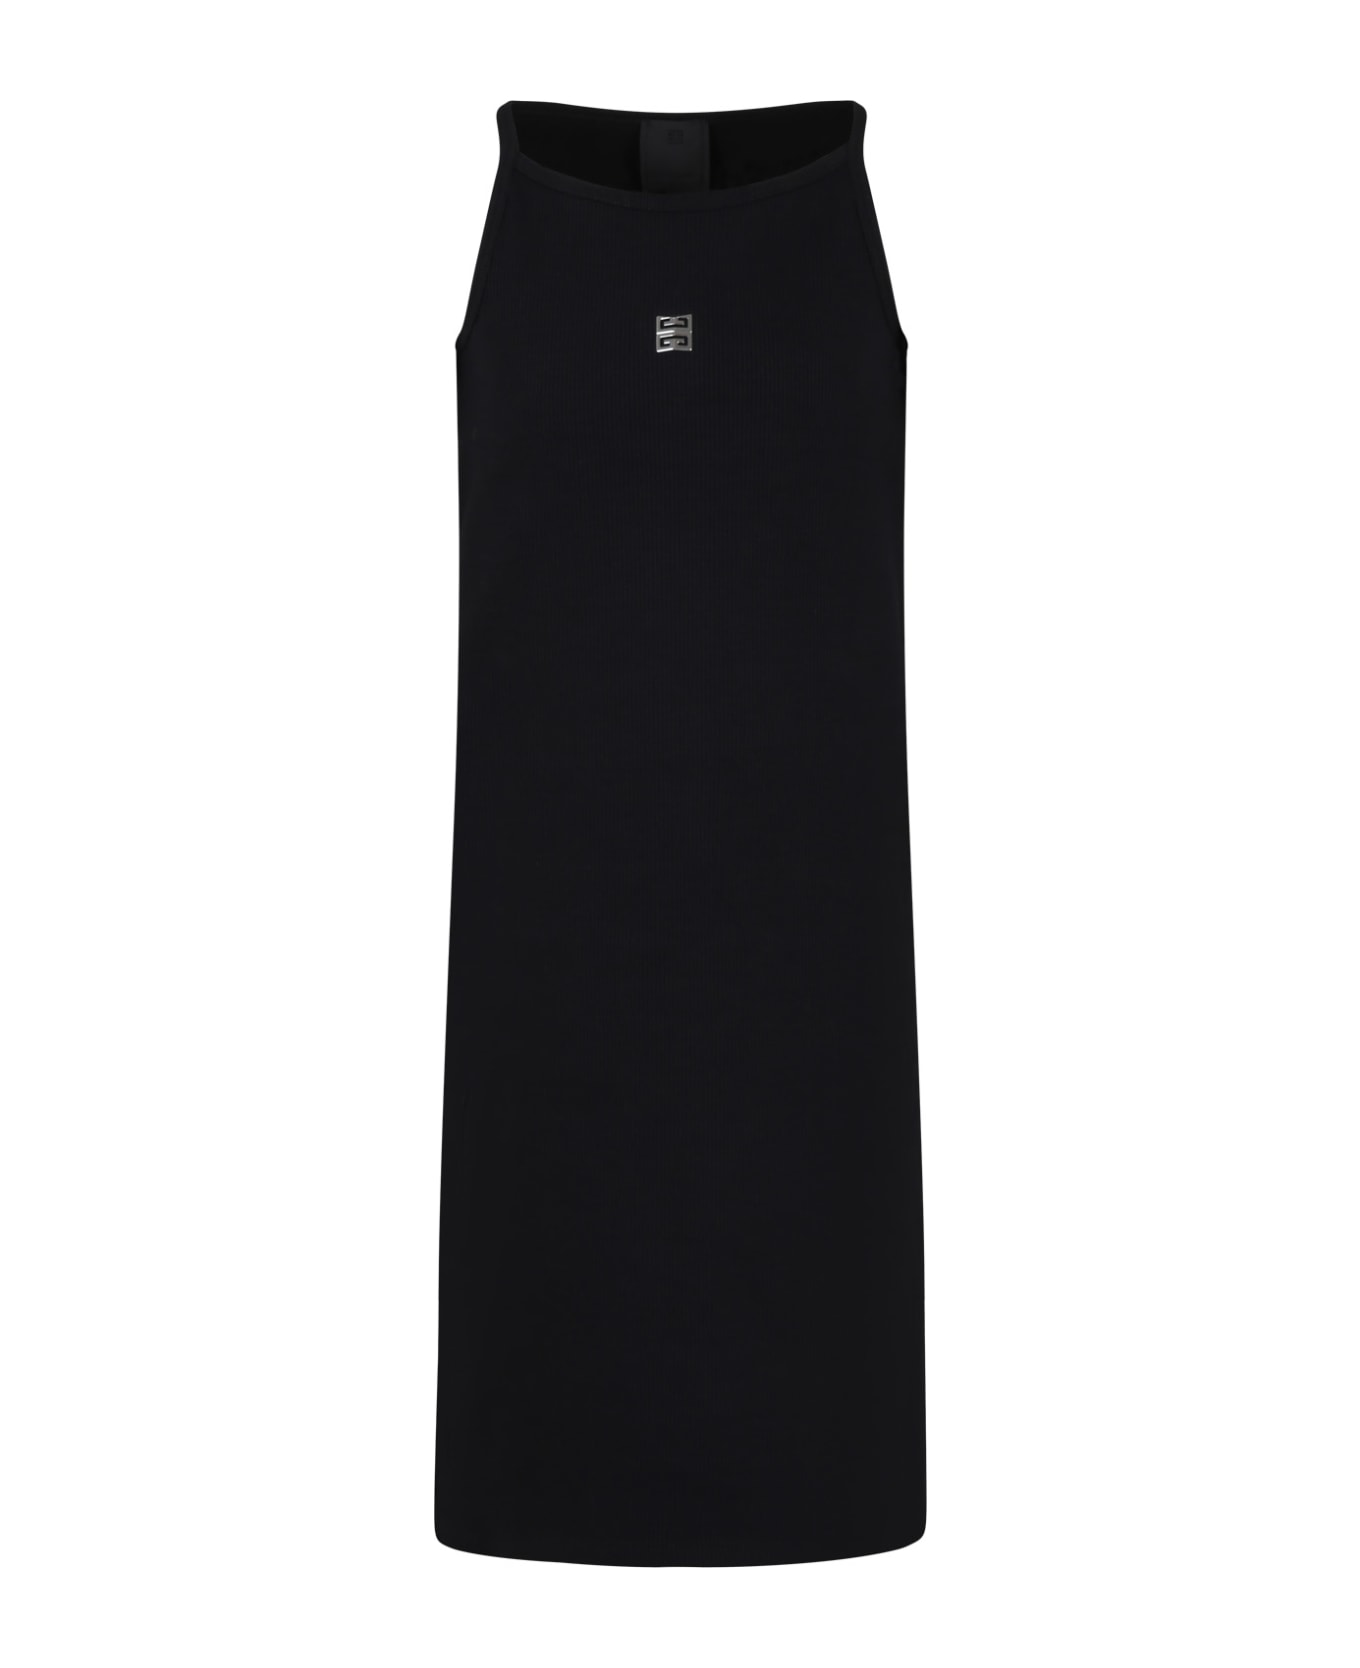 Givenchy Black Dress For Girl With Metal Logo - Black ワンピース＆ドレス